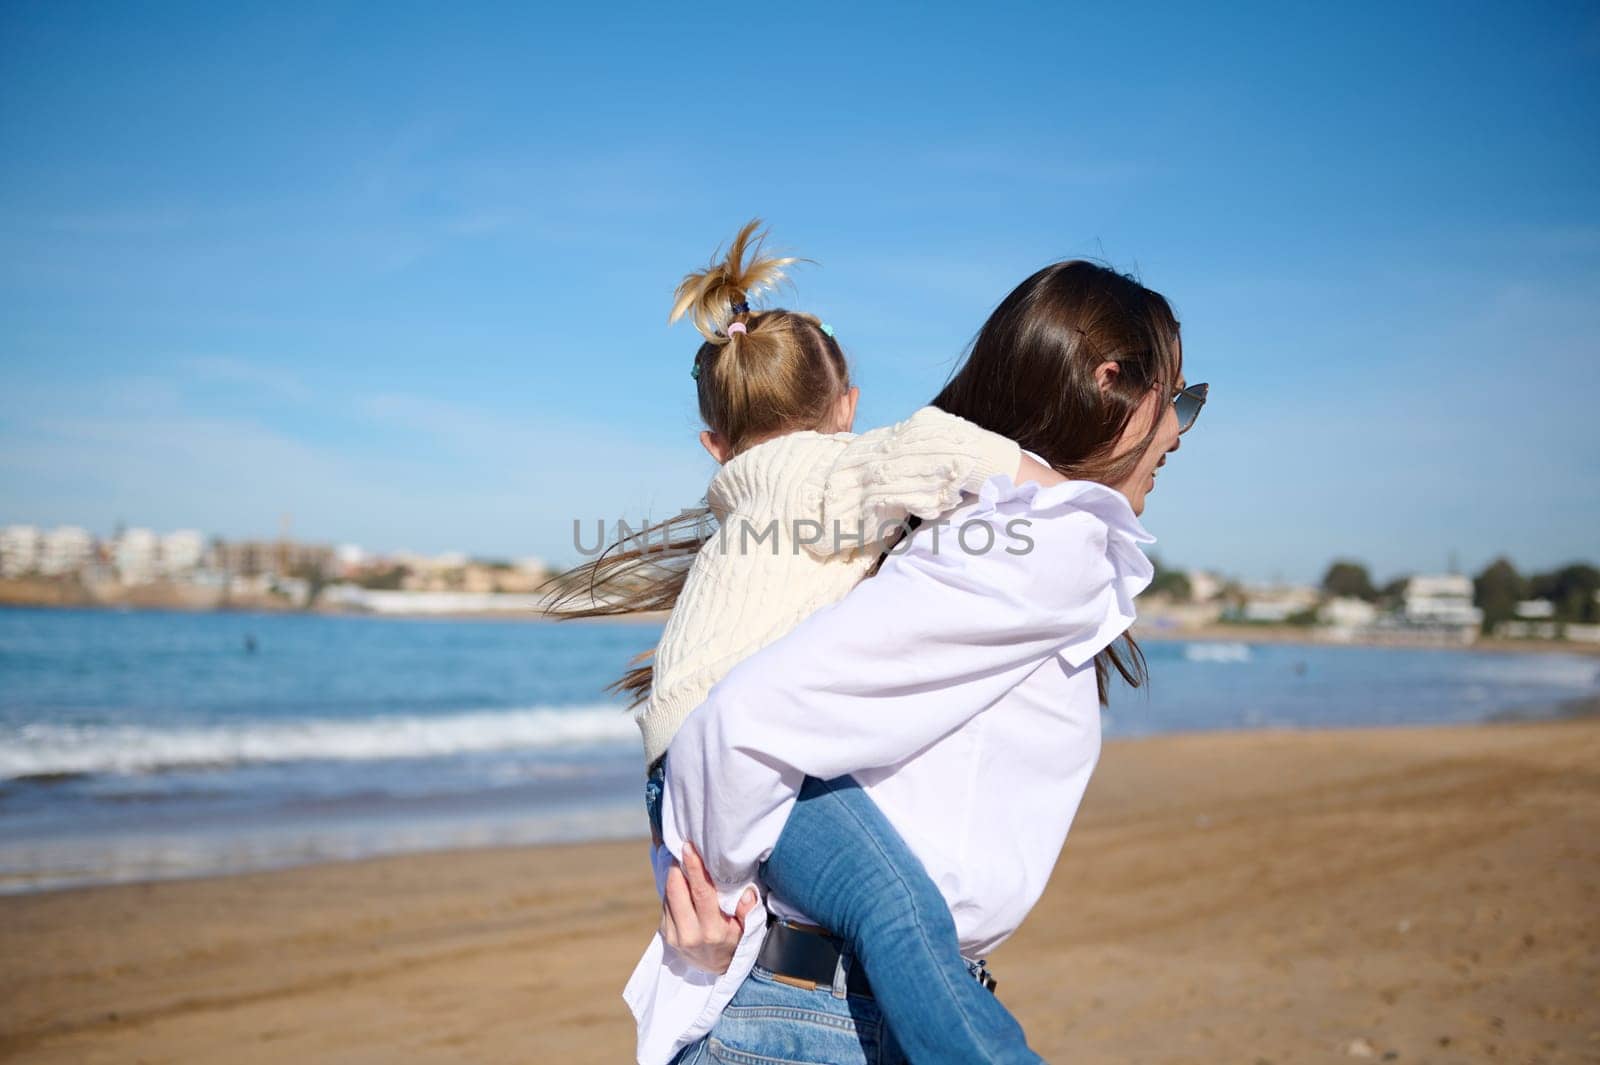 Rear view of a happy mother giving piggyback ride to her lovely daughter, spinning her around herself and enjoying happy family time together on the Atlantic beach.